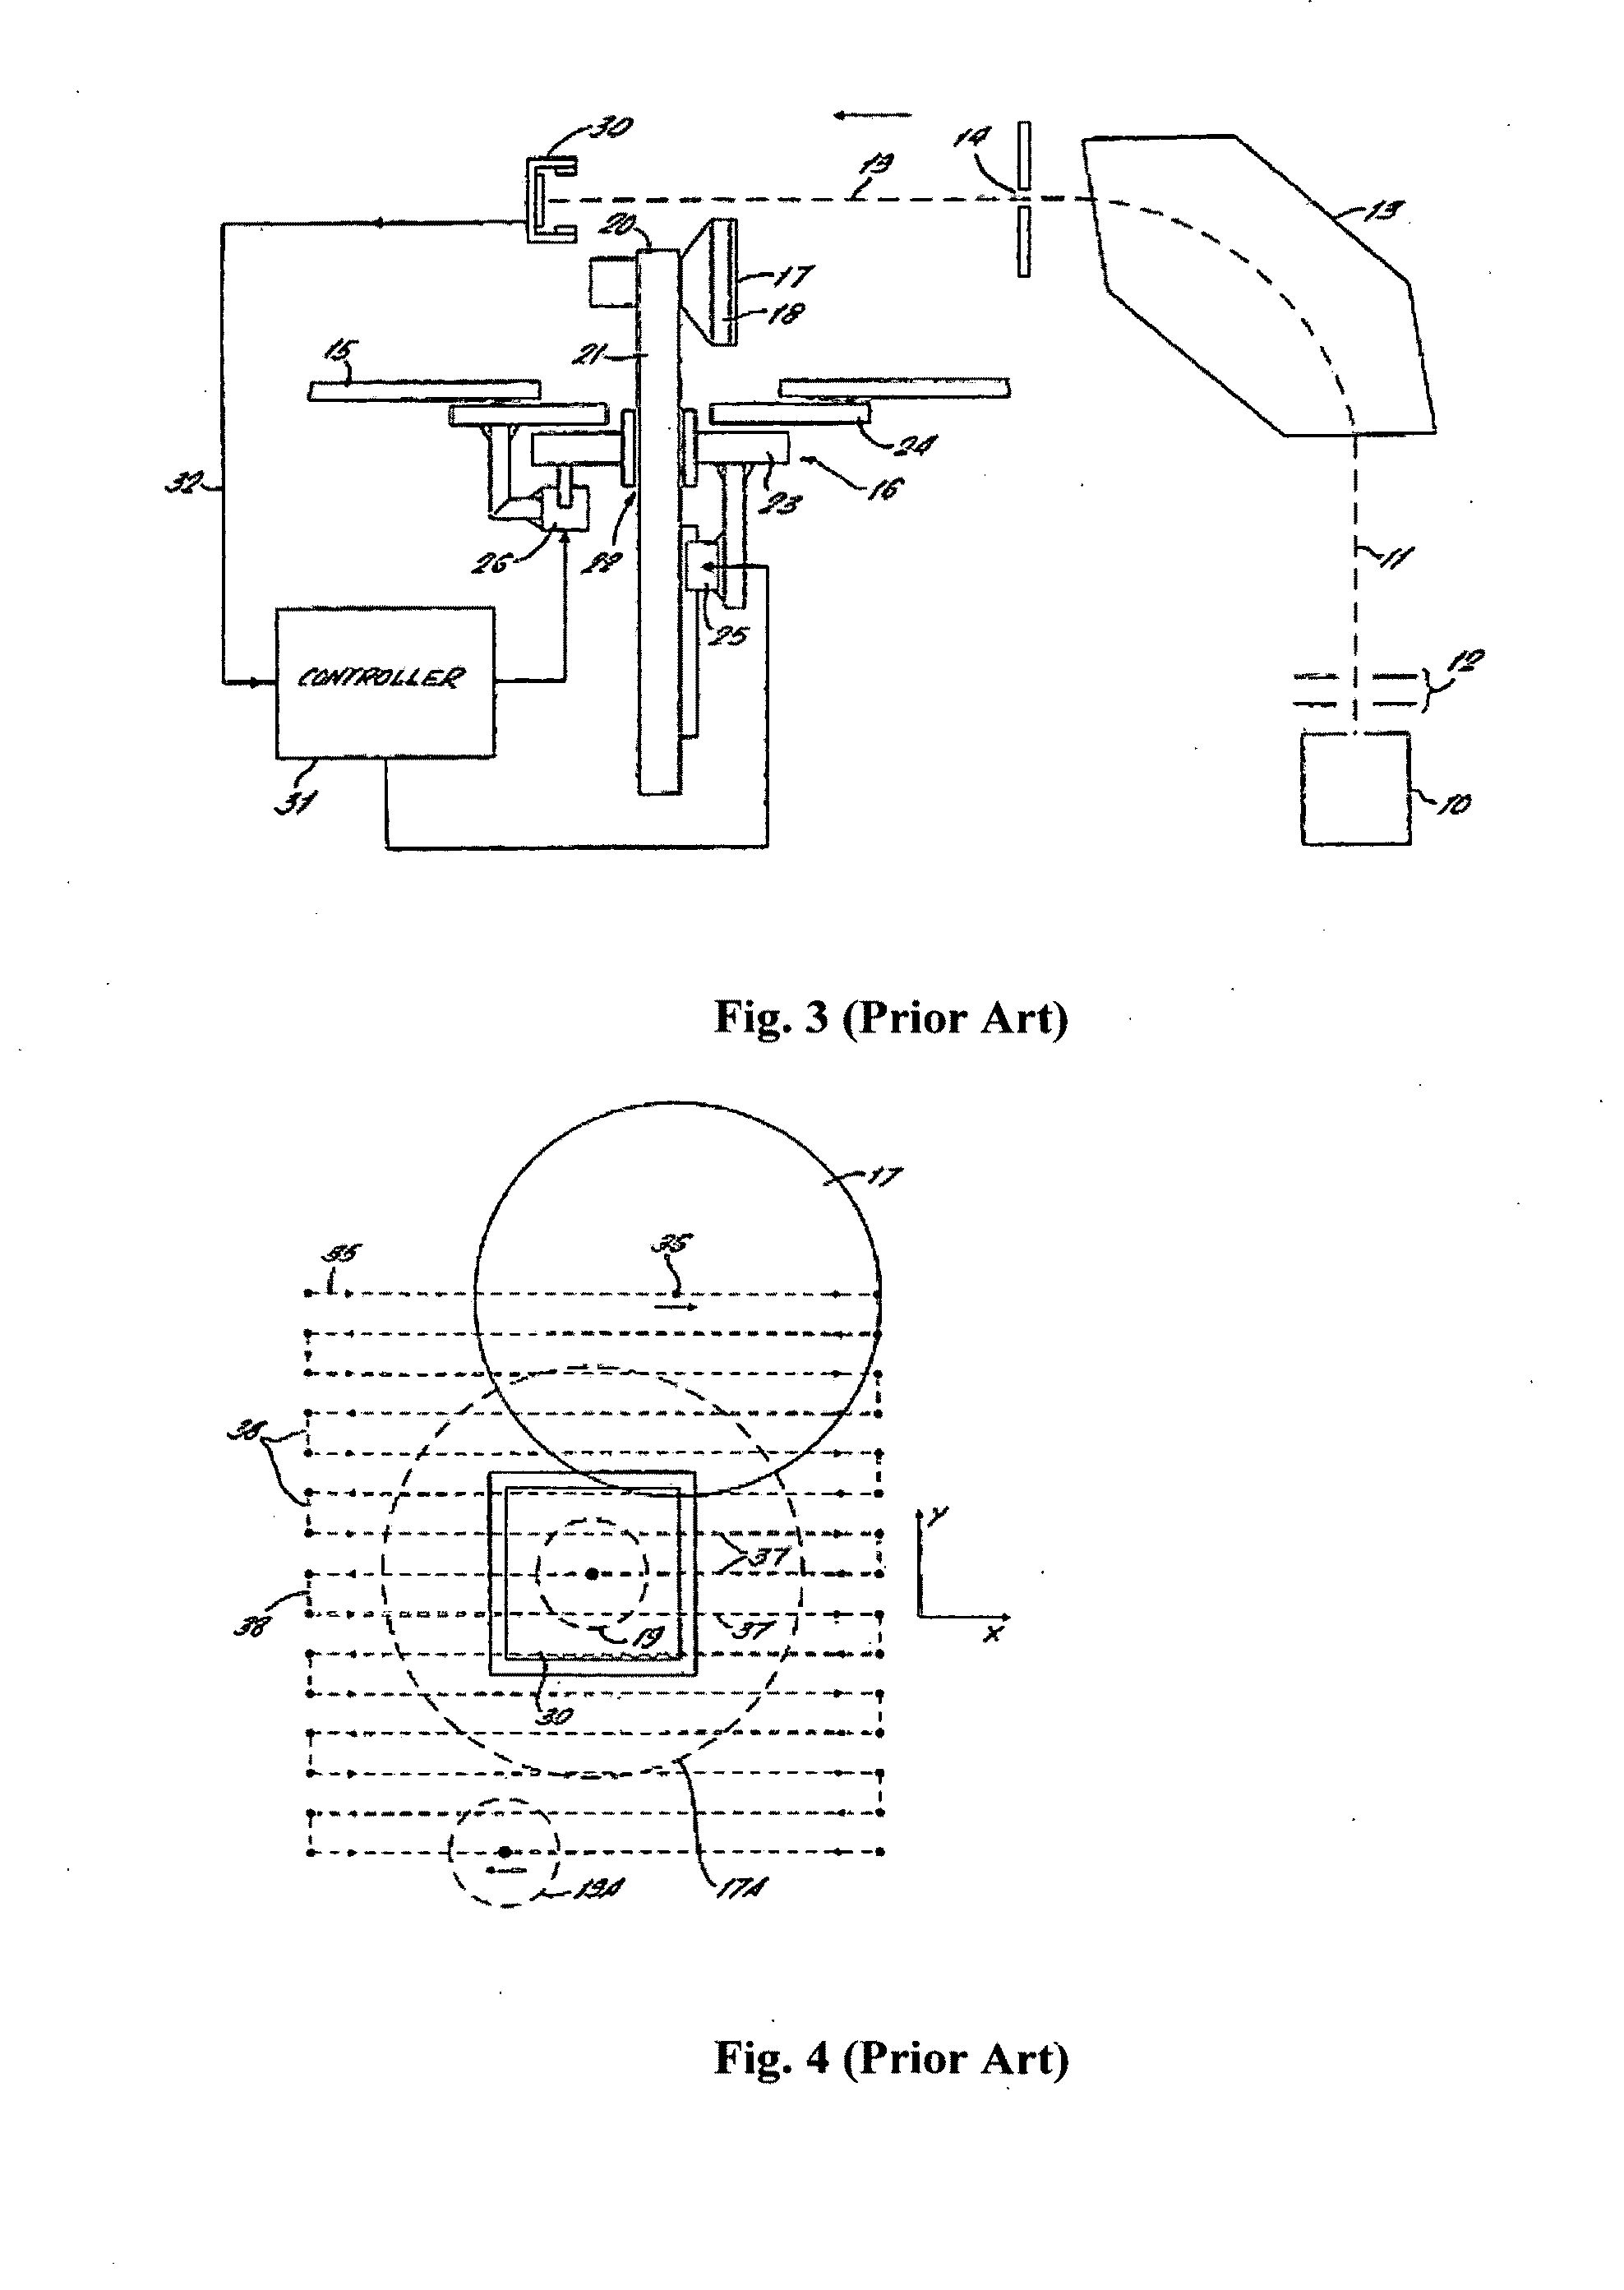 Apparatus & method for ion beam implantation using scanning and spot beams with improved high dose beam quality